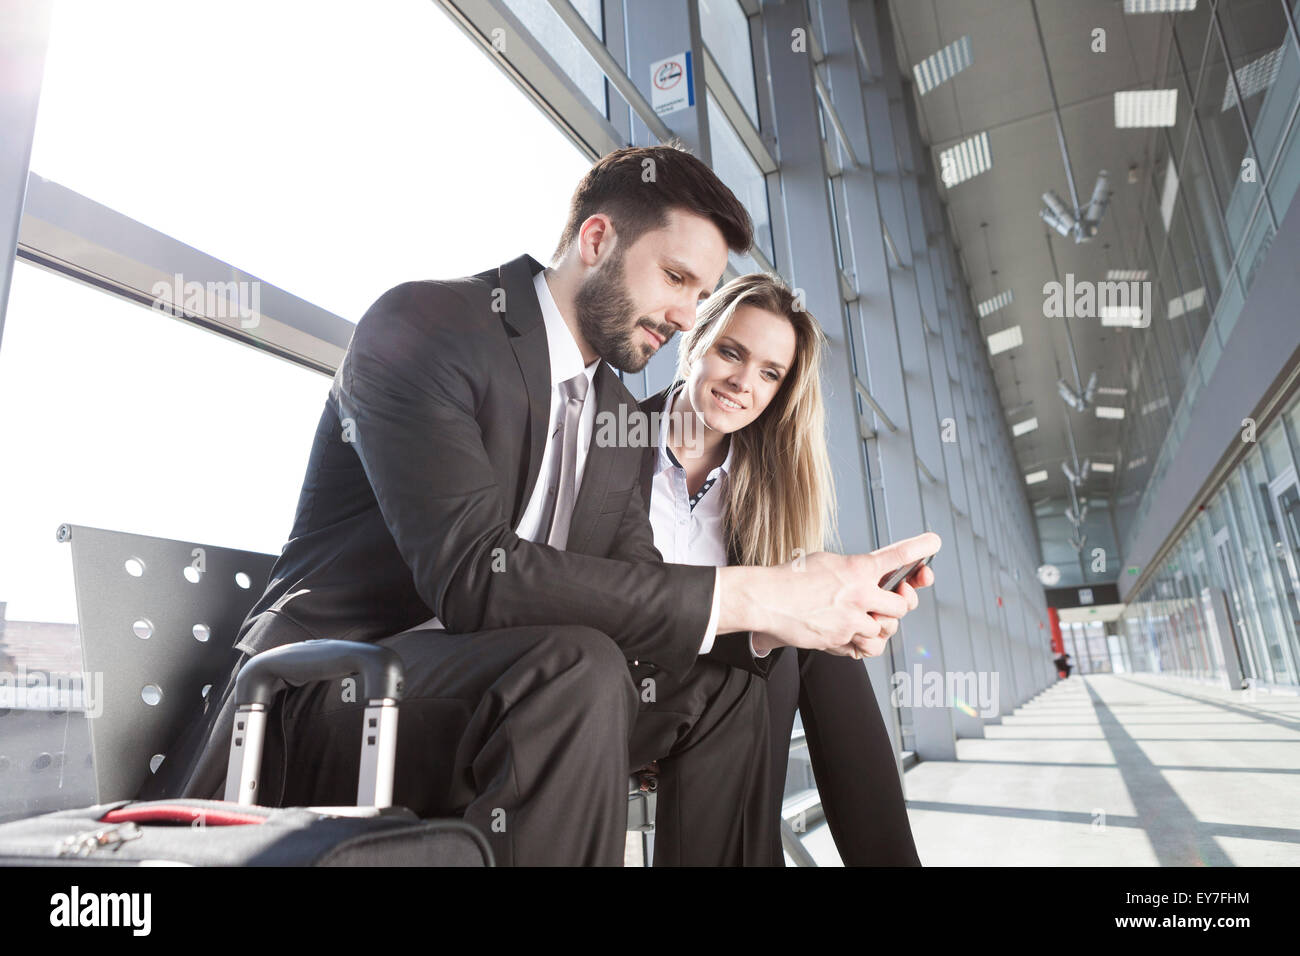 Business partners in airport looking at smart phone Stock Photo